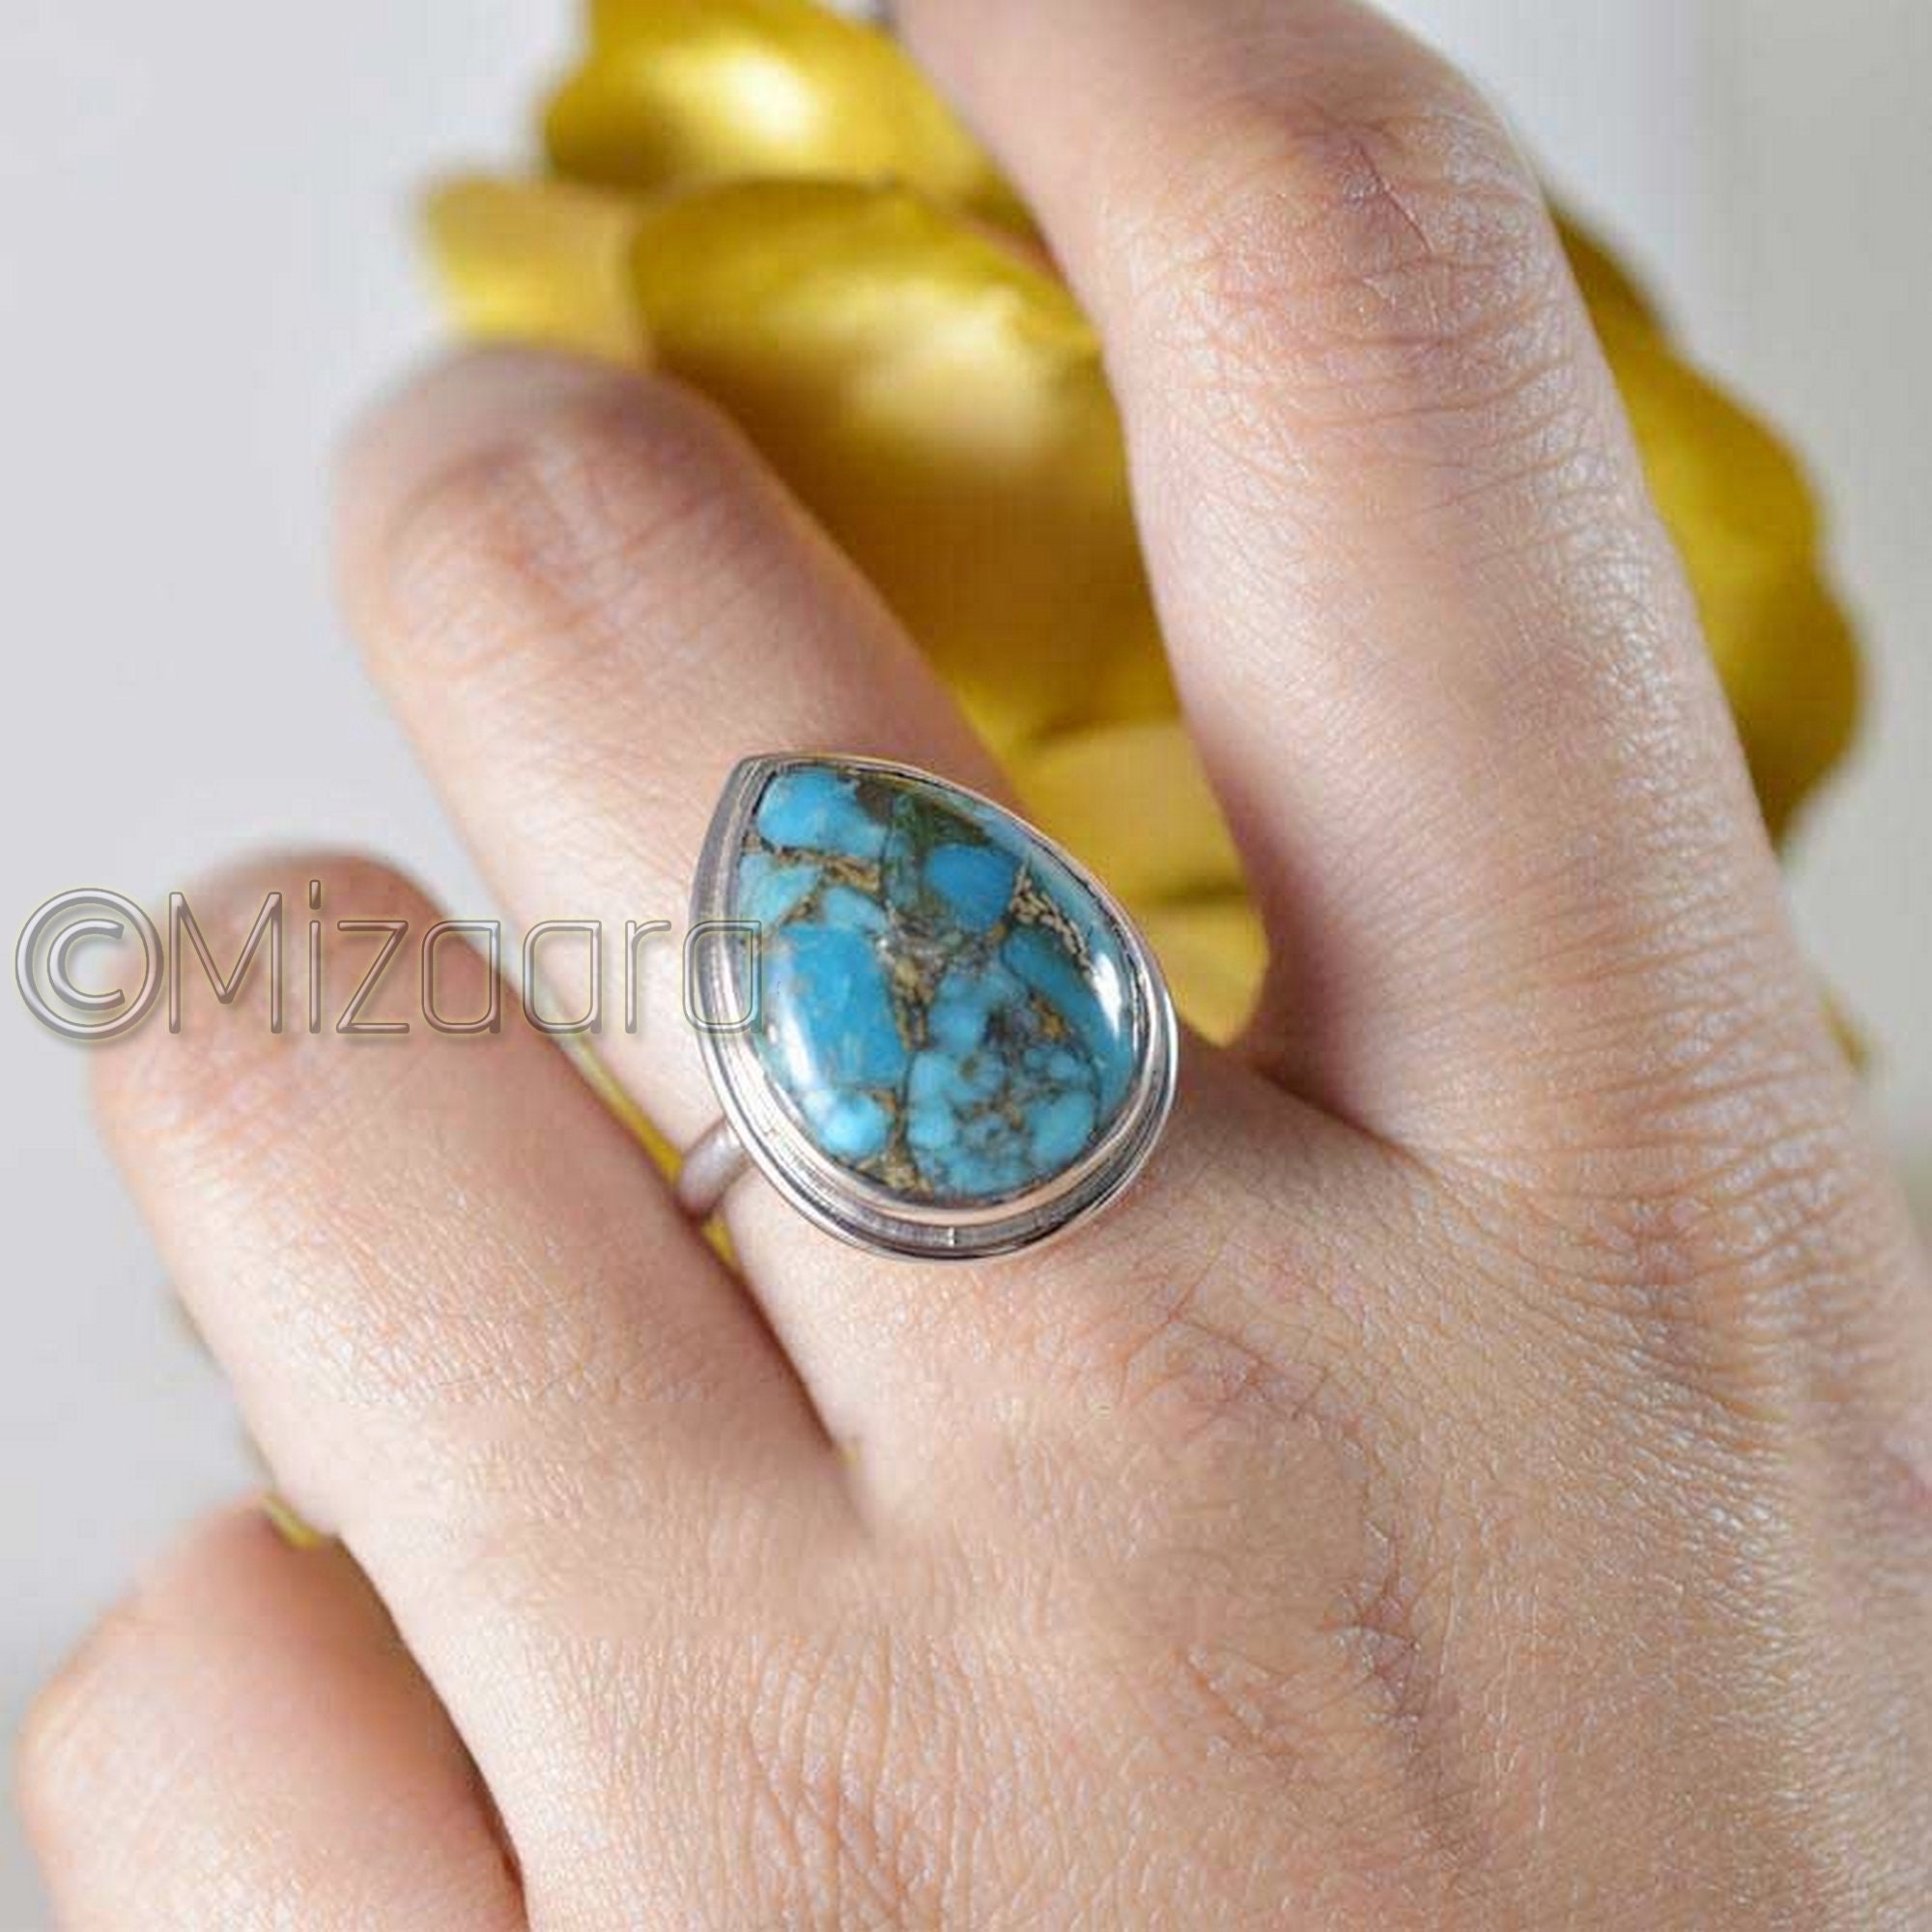 Blue Copper Turquoise Ring Adjustable Huge Gemstone Cocktail Statement Gift For Her Mermaid Wrap Openable